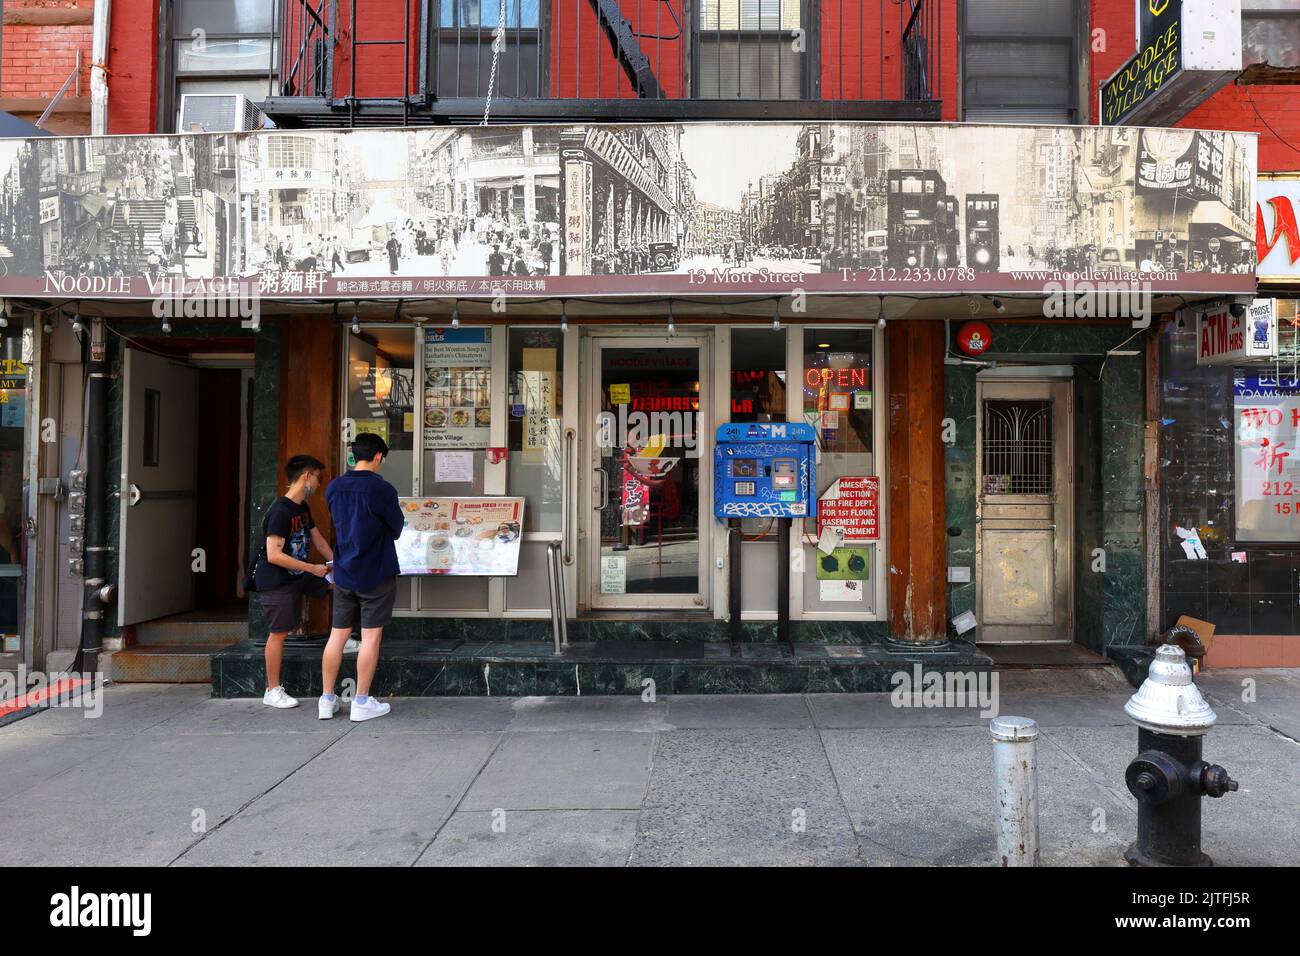 Noodle Village 粥麵軒, 13 Mott St, New York, NYC storefront photo of a Hong Kong Chinese restaurant in Manhattan Chinatown. Stock Photo